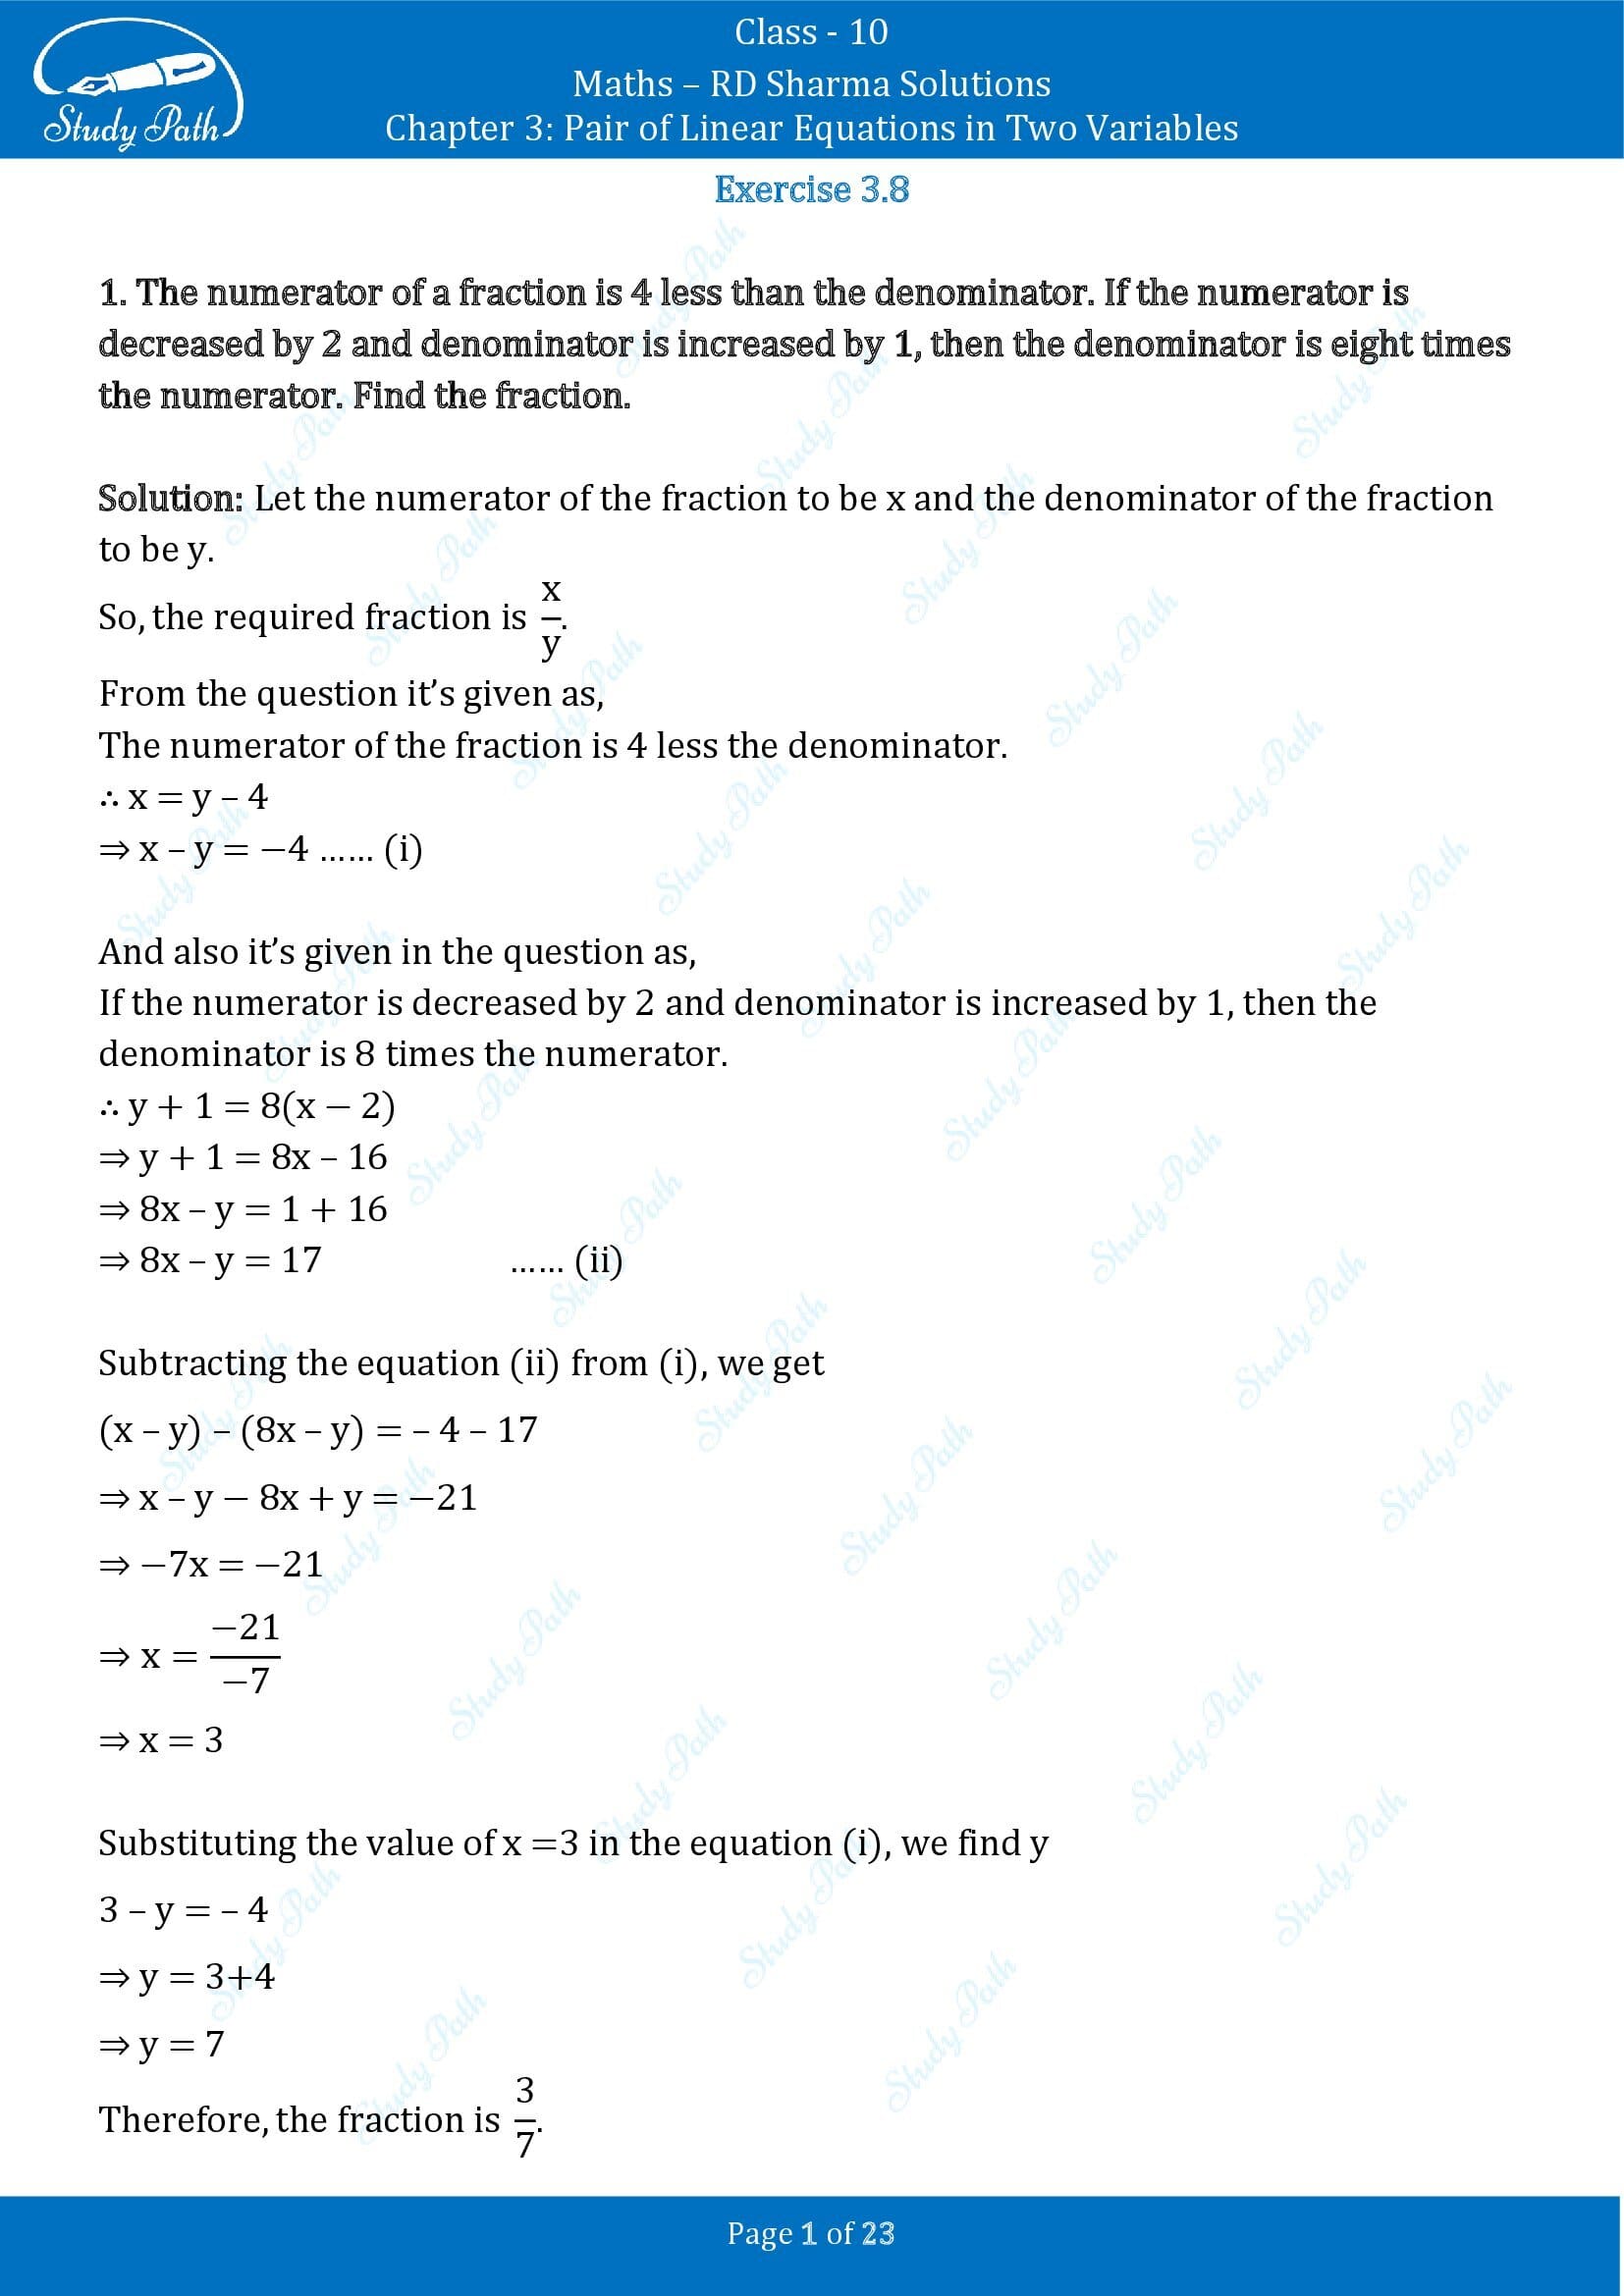 RD Sharma Solutions Class 10 Chapter 3 Pair of Linear Equations in Two Variables Exercise 3.8 00001